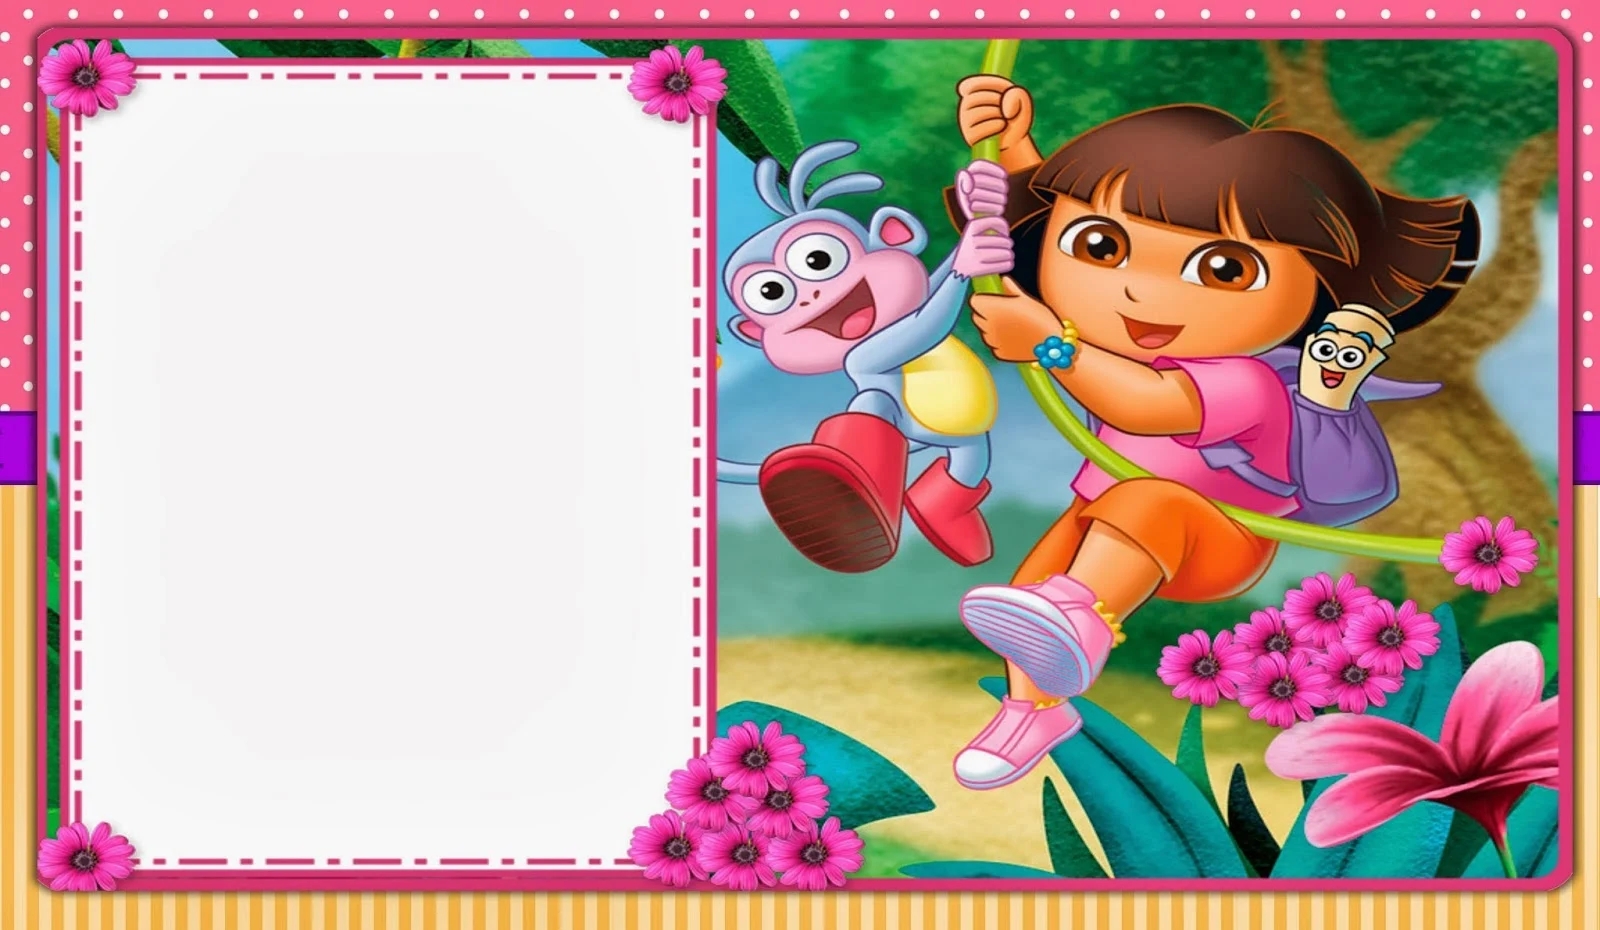 Dora The Explorer Free Printable Invitations Boxes And Party Printables Oh My Fiesta In English - Dora The Explorer Free Printable Invitations